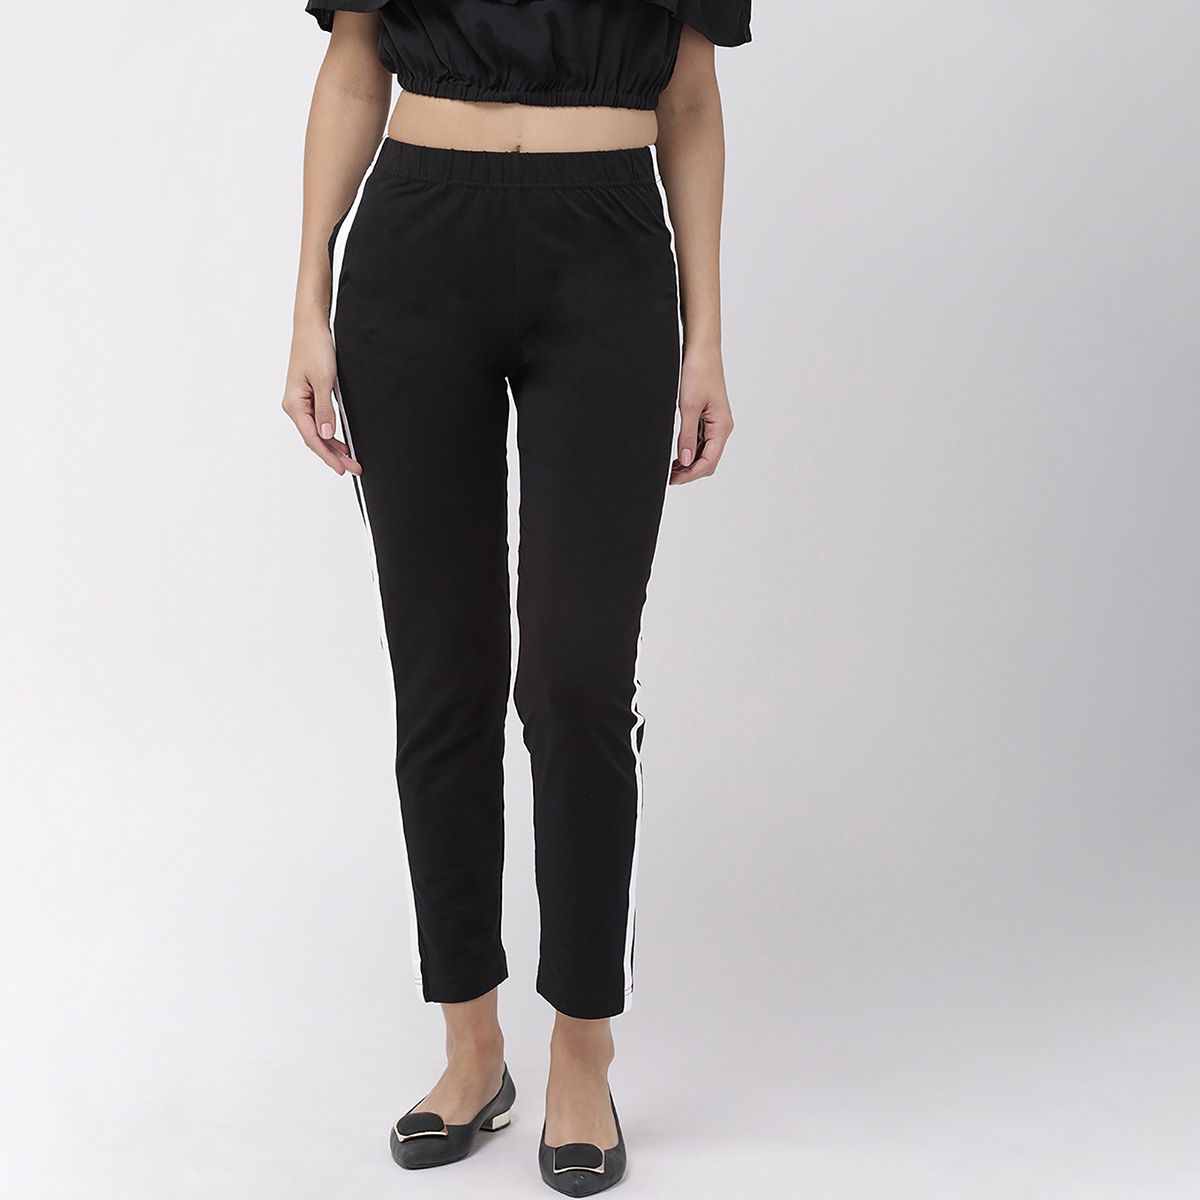 Buy United Colors Of Benetton Solid Track Pants- Black online